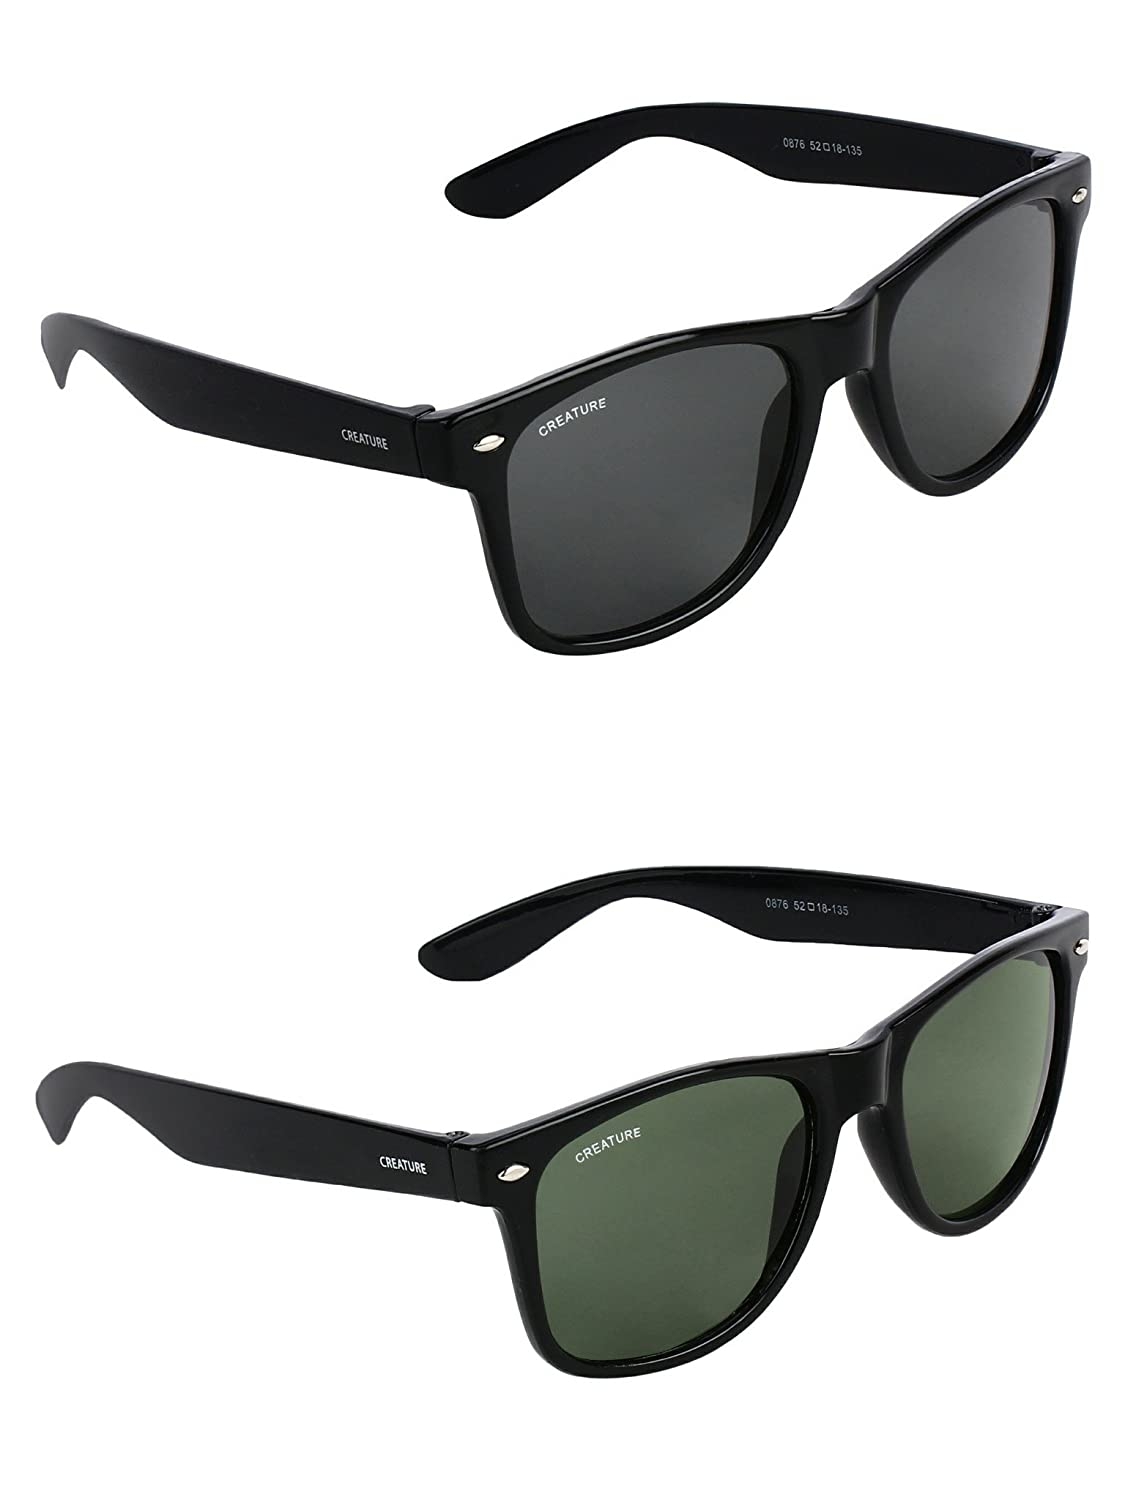 CREATURE | CREATURE Black & Green Sunglasses Combo with UV Protection (Lens-Black & Green|Frame-Black & Green)